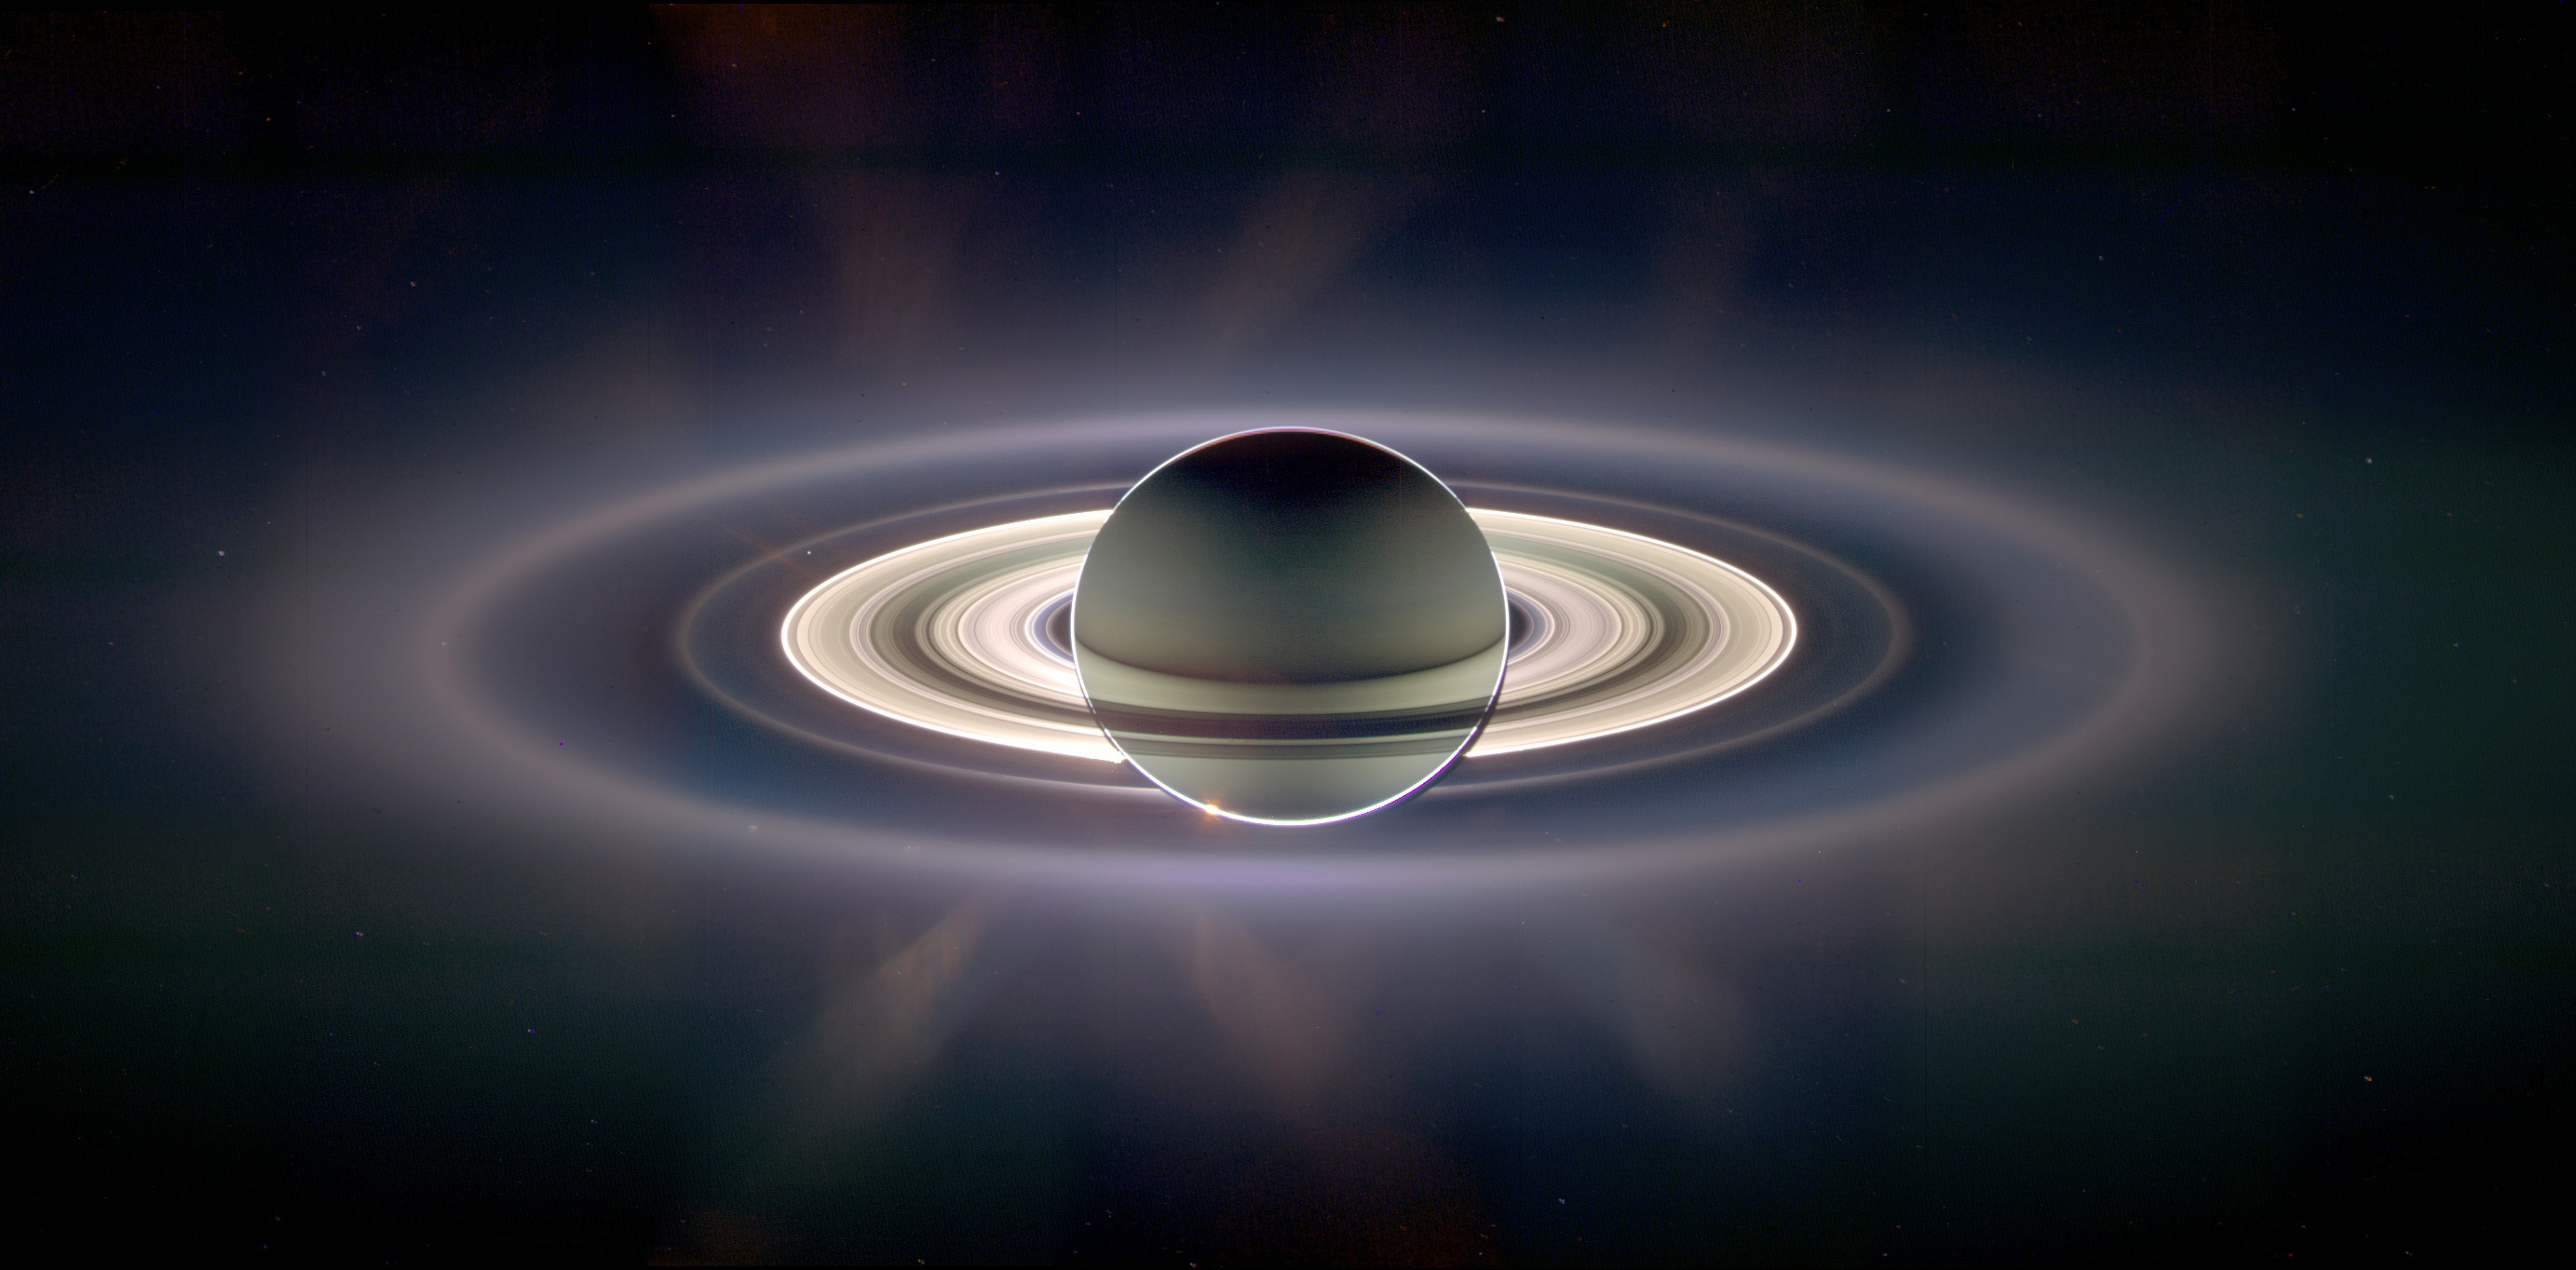 In the Shadow of Saturn